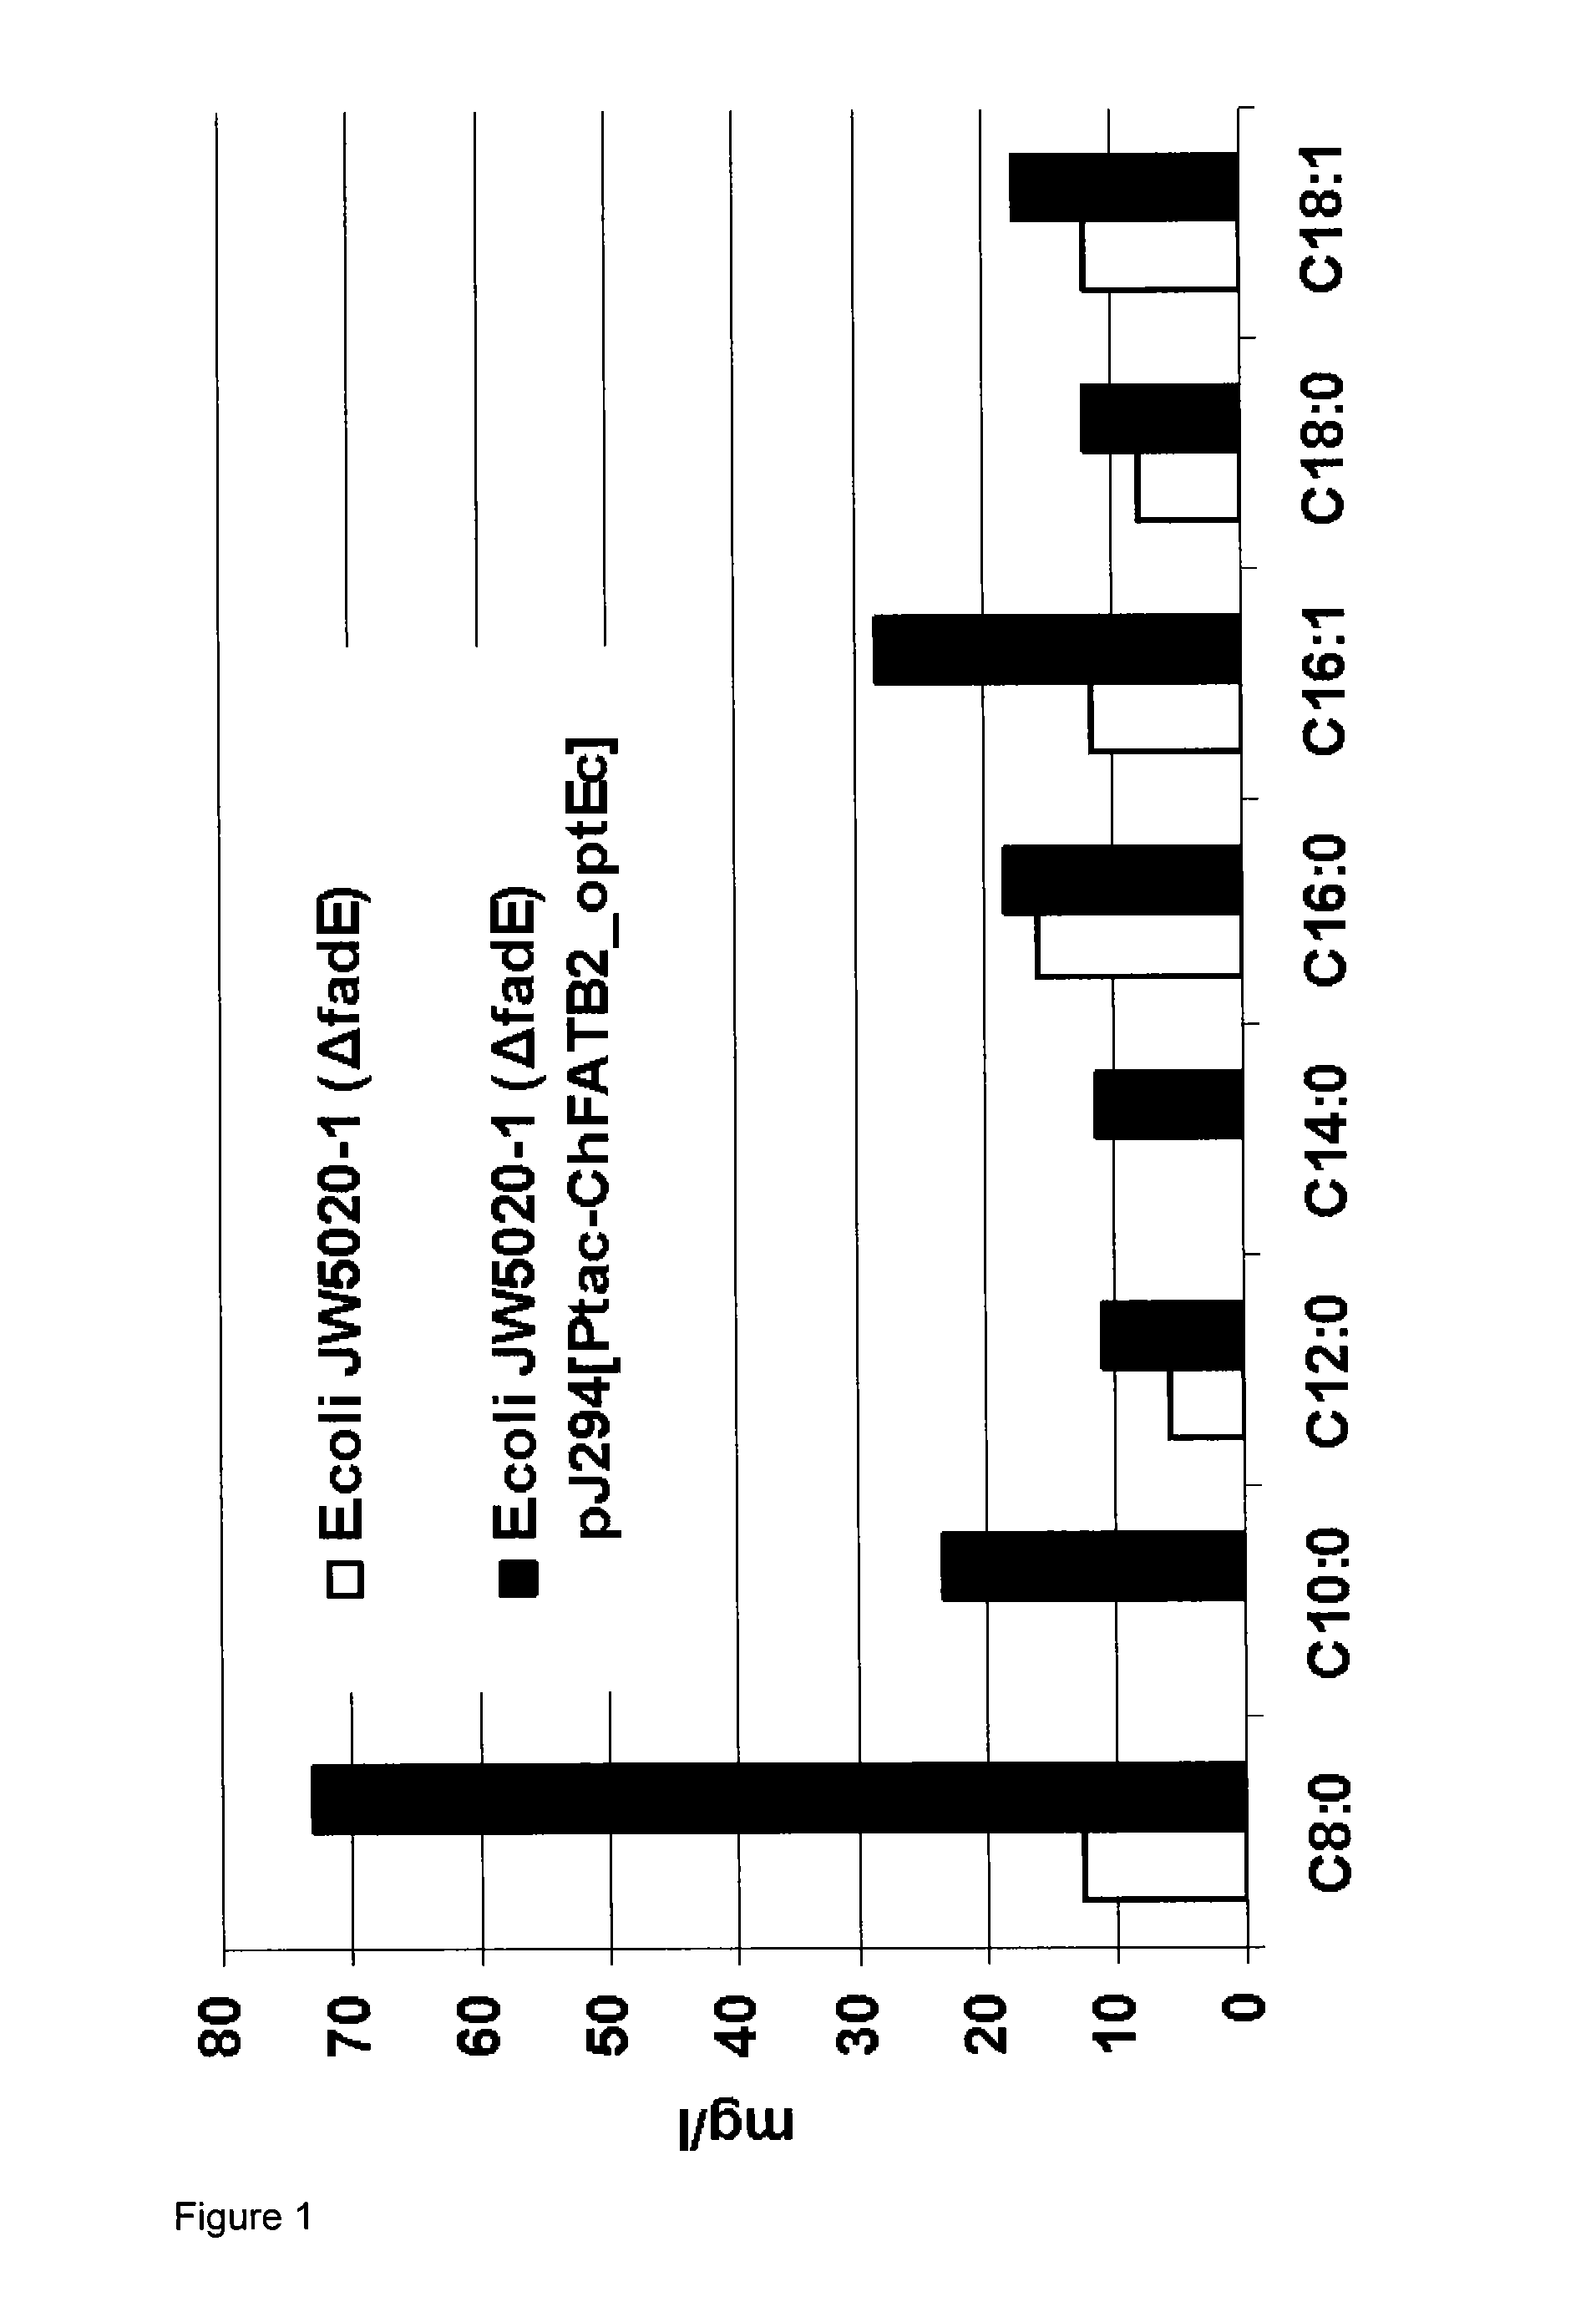 Multi-stage synthesis method with synthesis gas